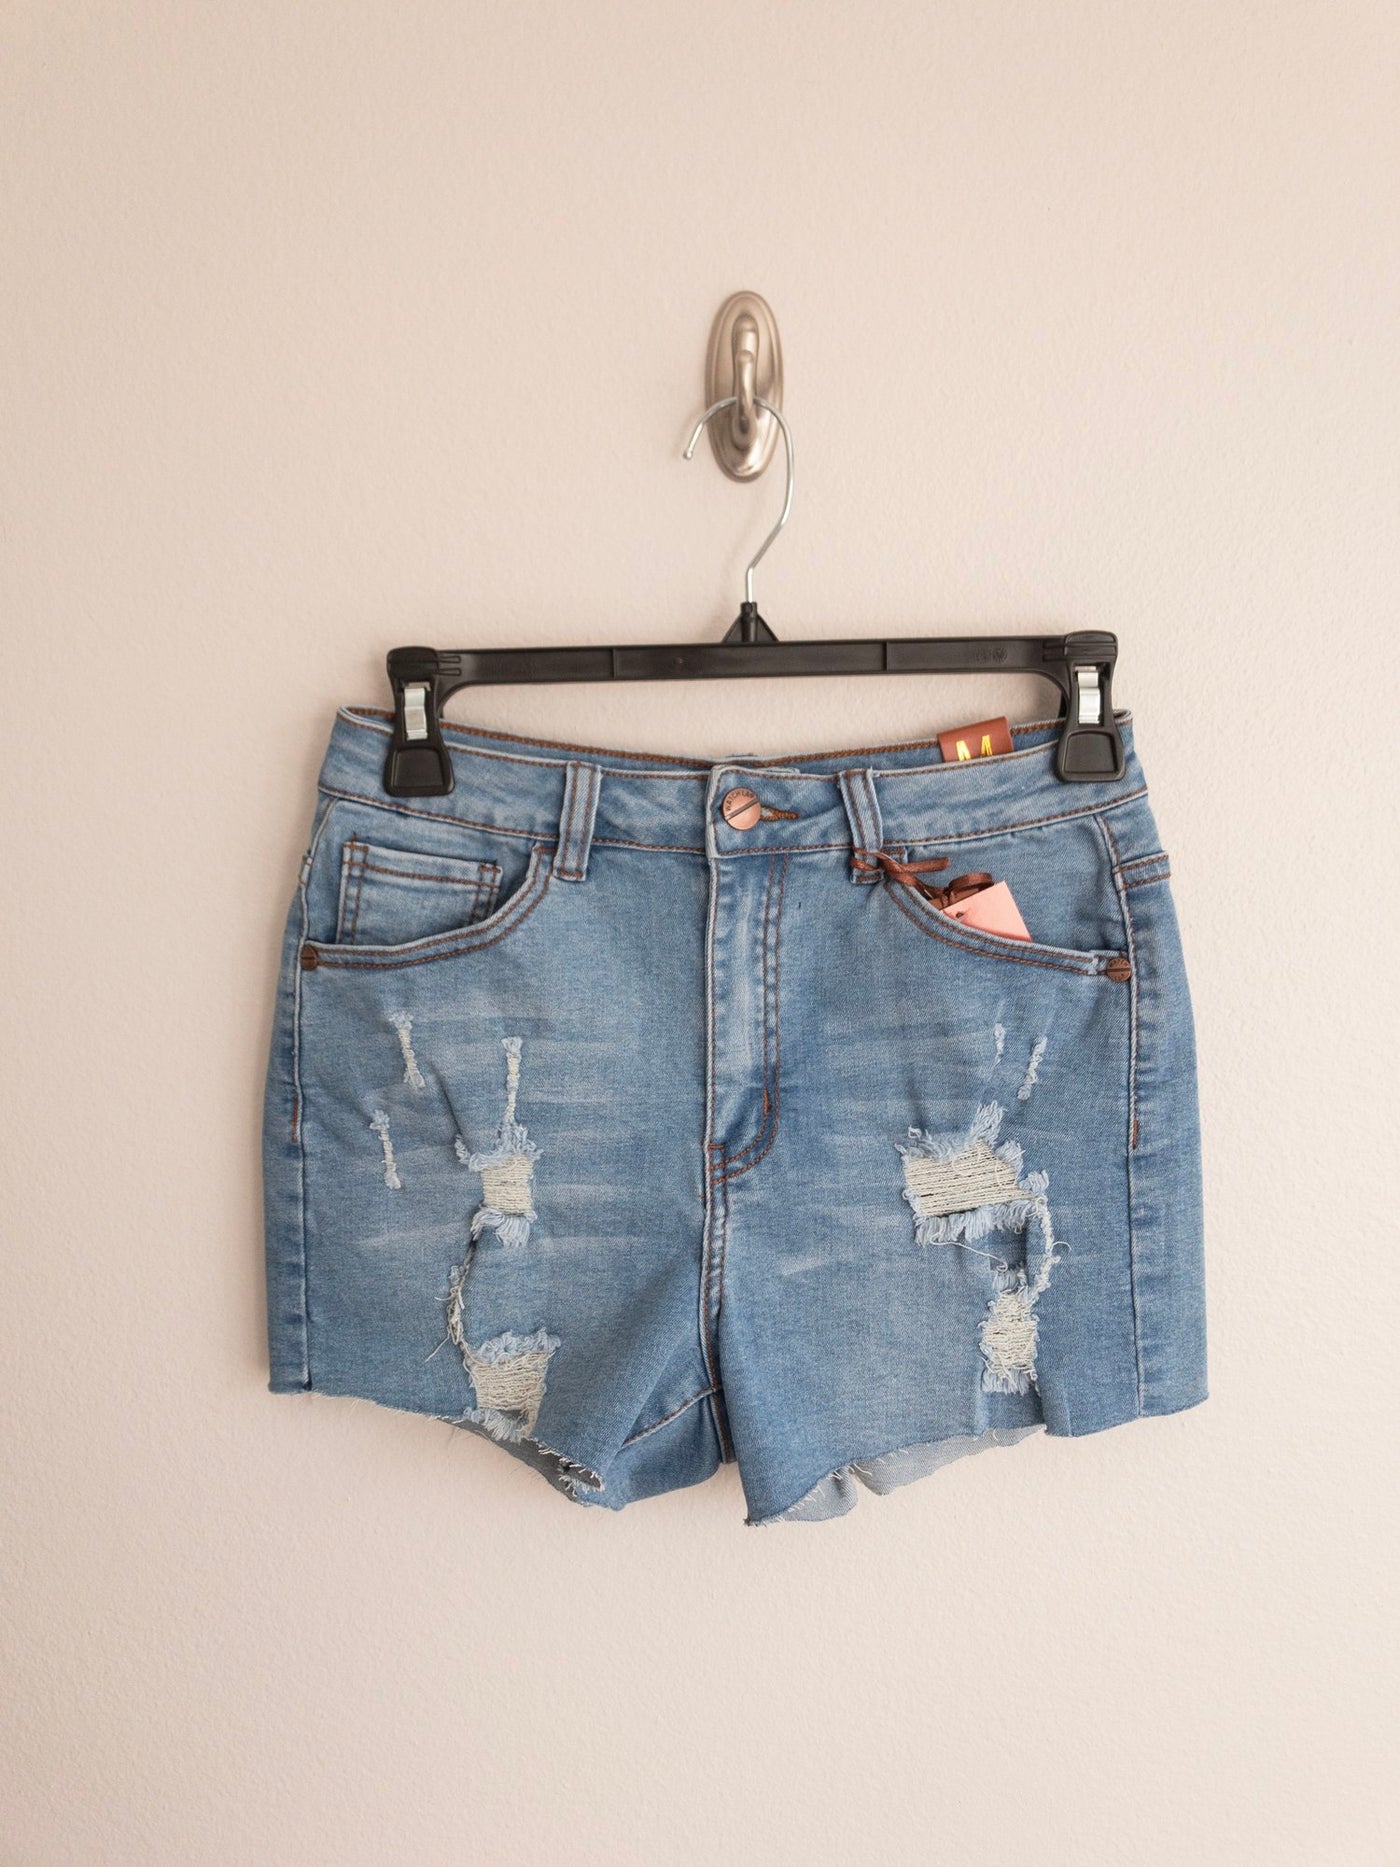 Roxie Denim Shorts - Corinne an Affordable Women's Clothing Boutique in the US USA